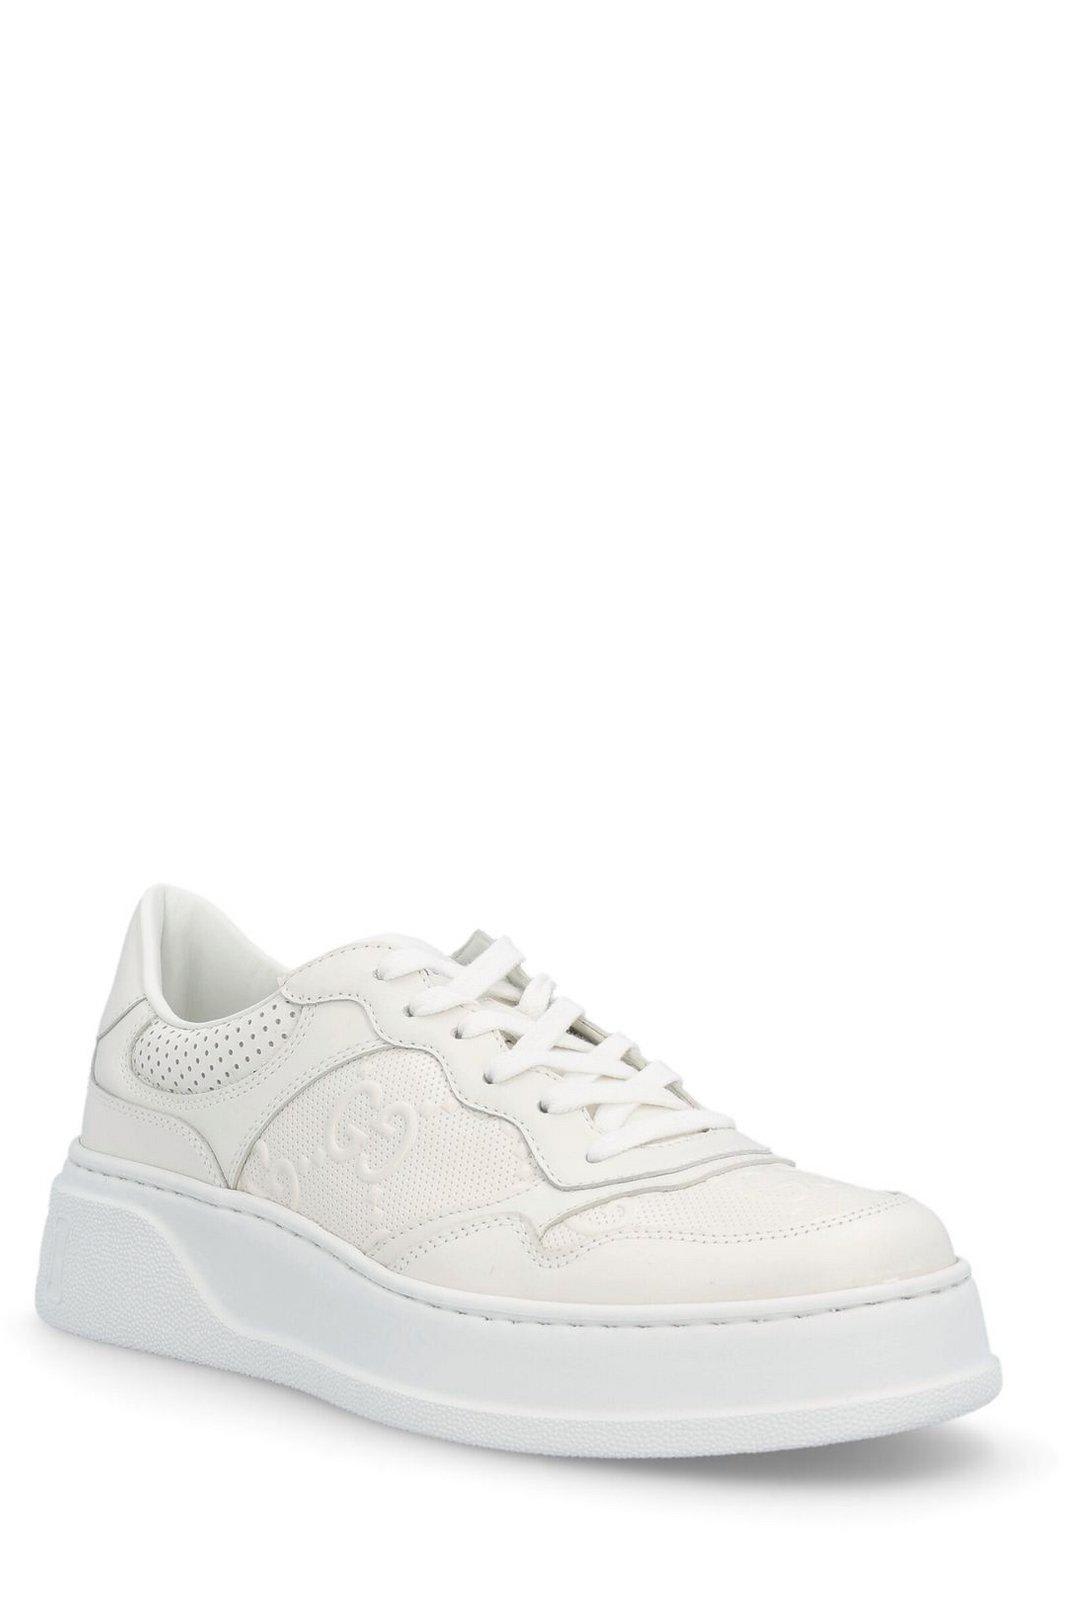 Shop Gucci Gg Embossed Sneakers